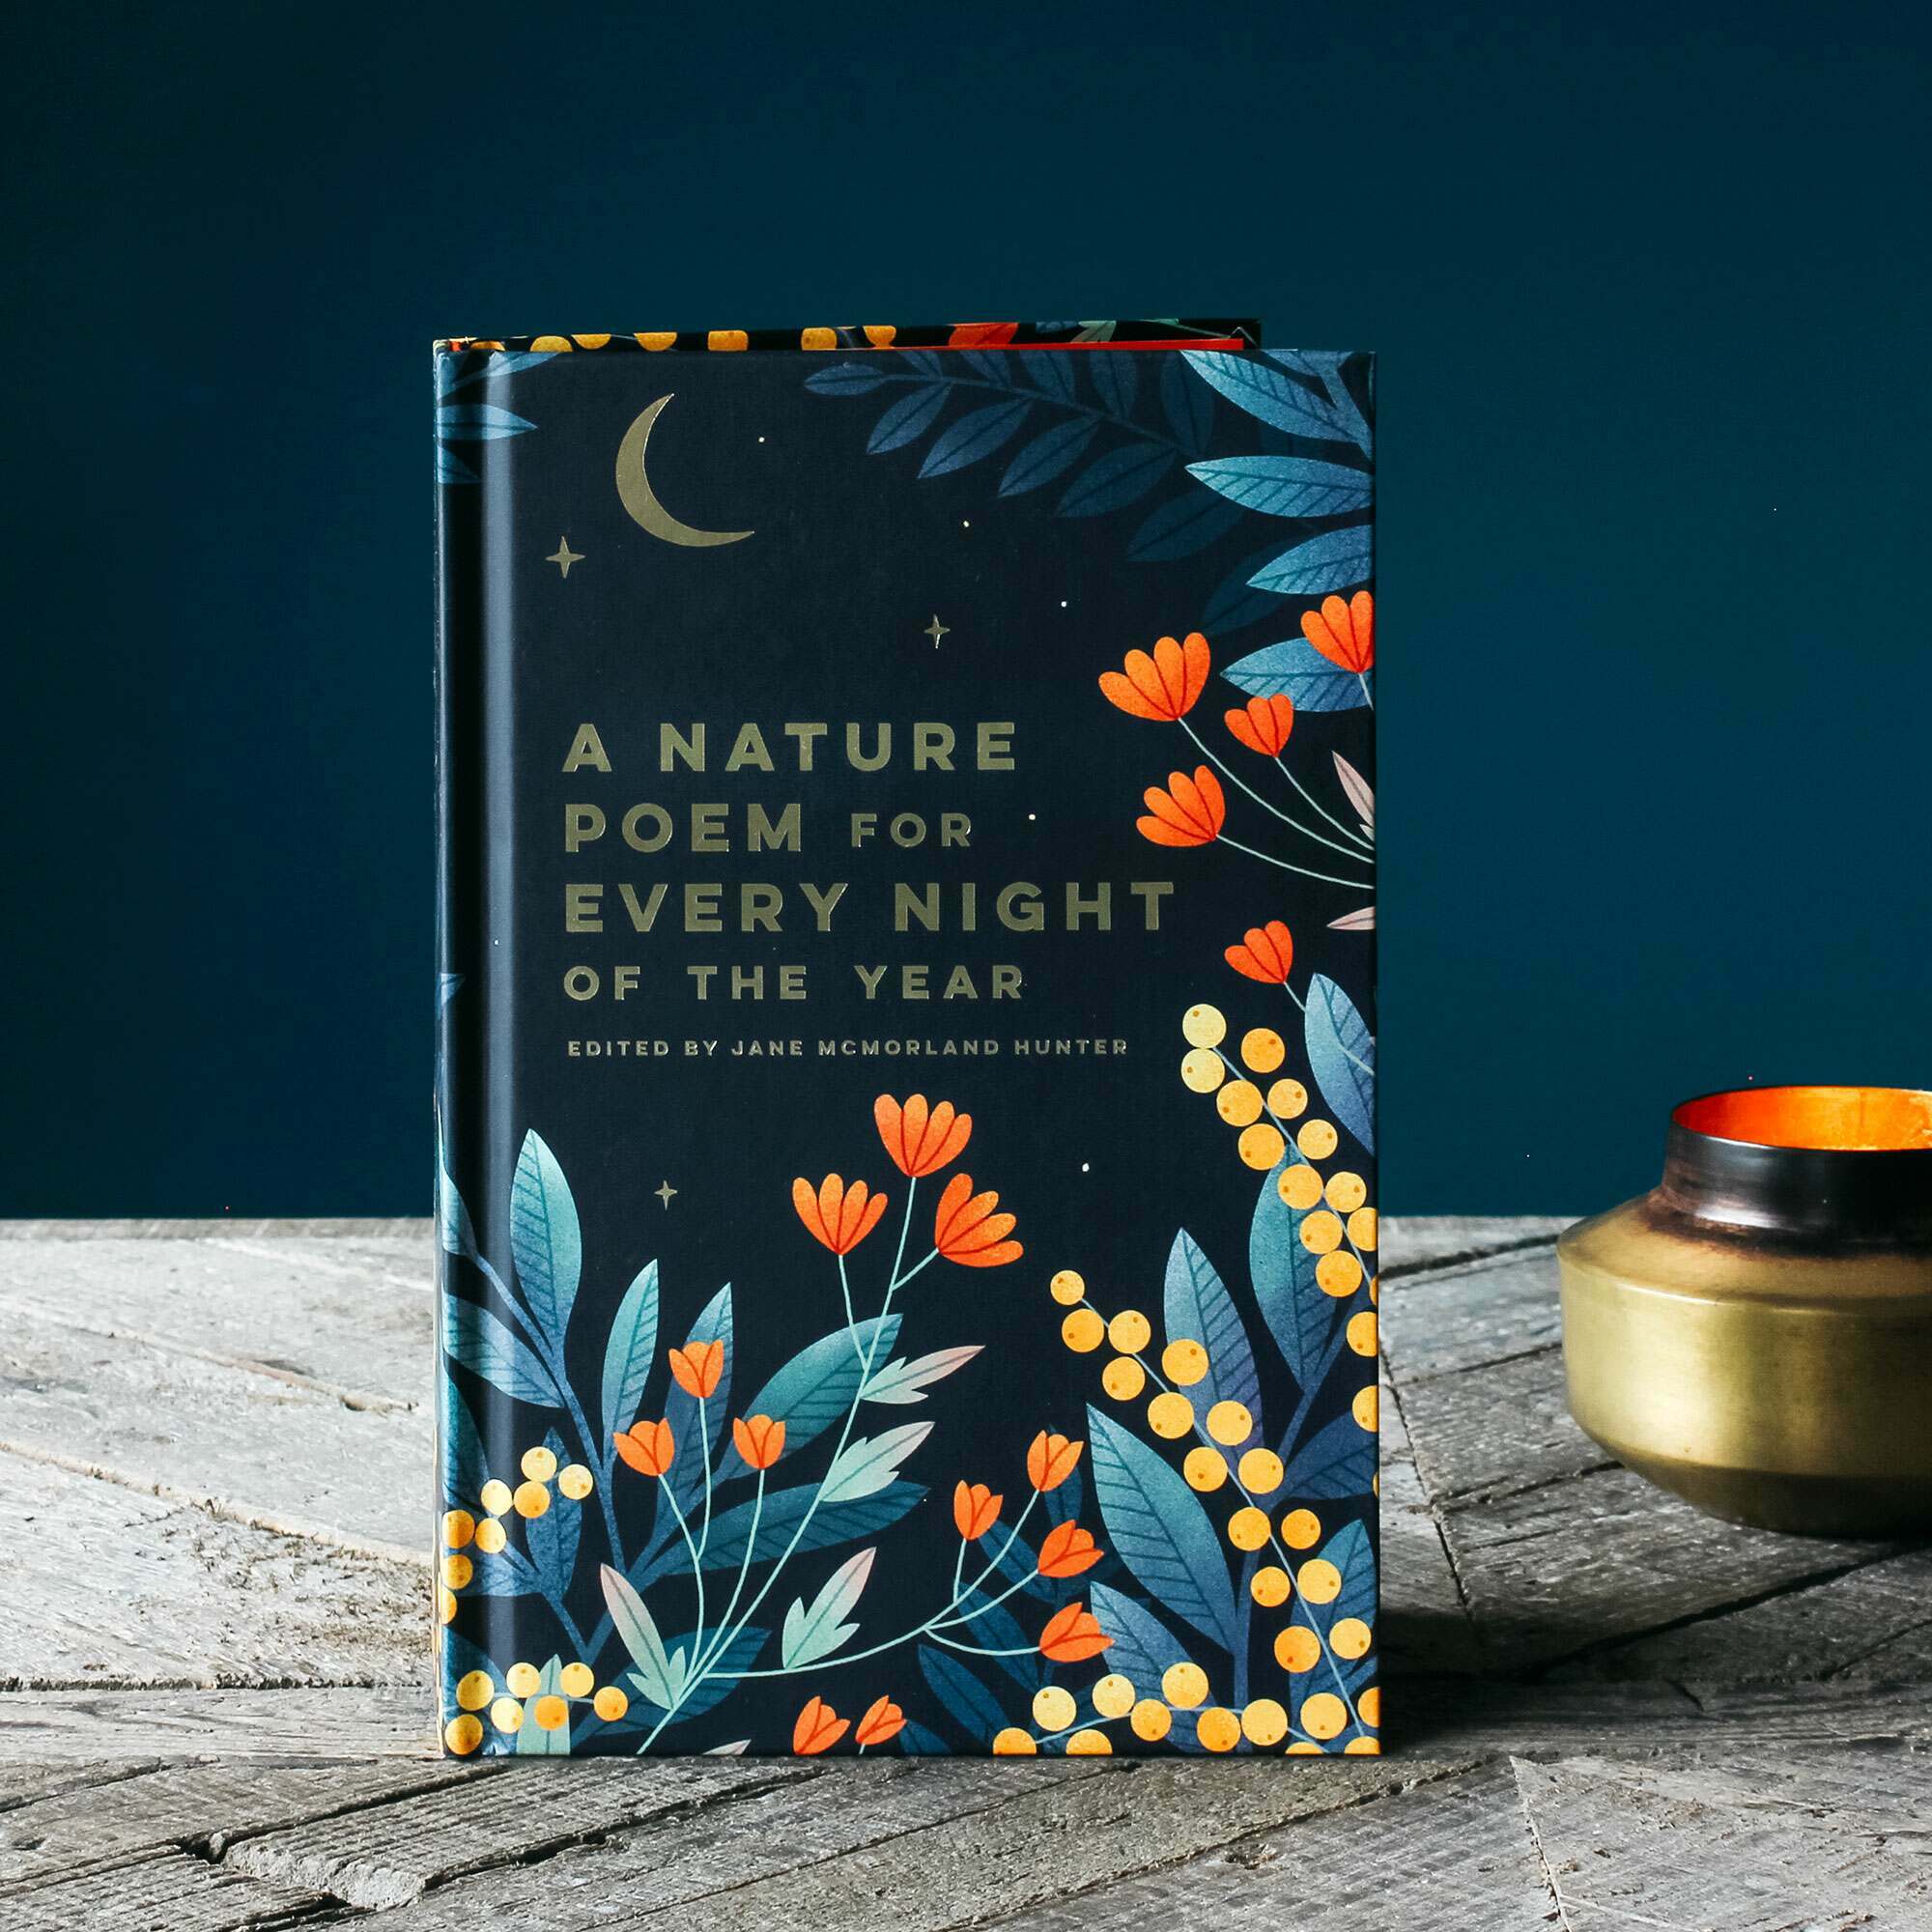 Read more about Graham and green a nature poem for every night book